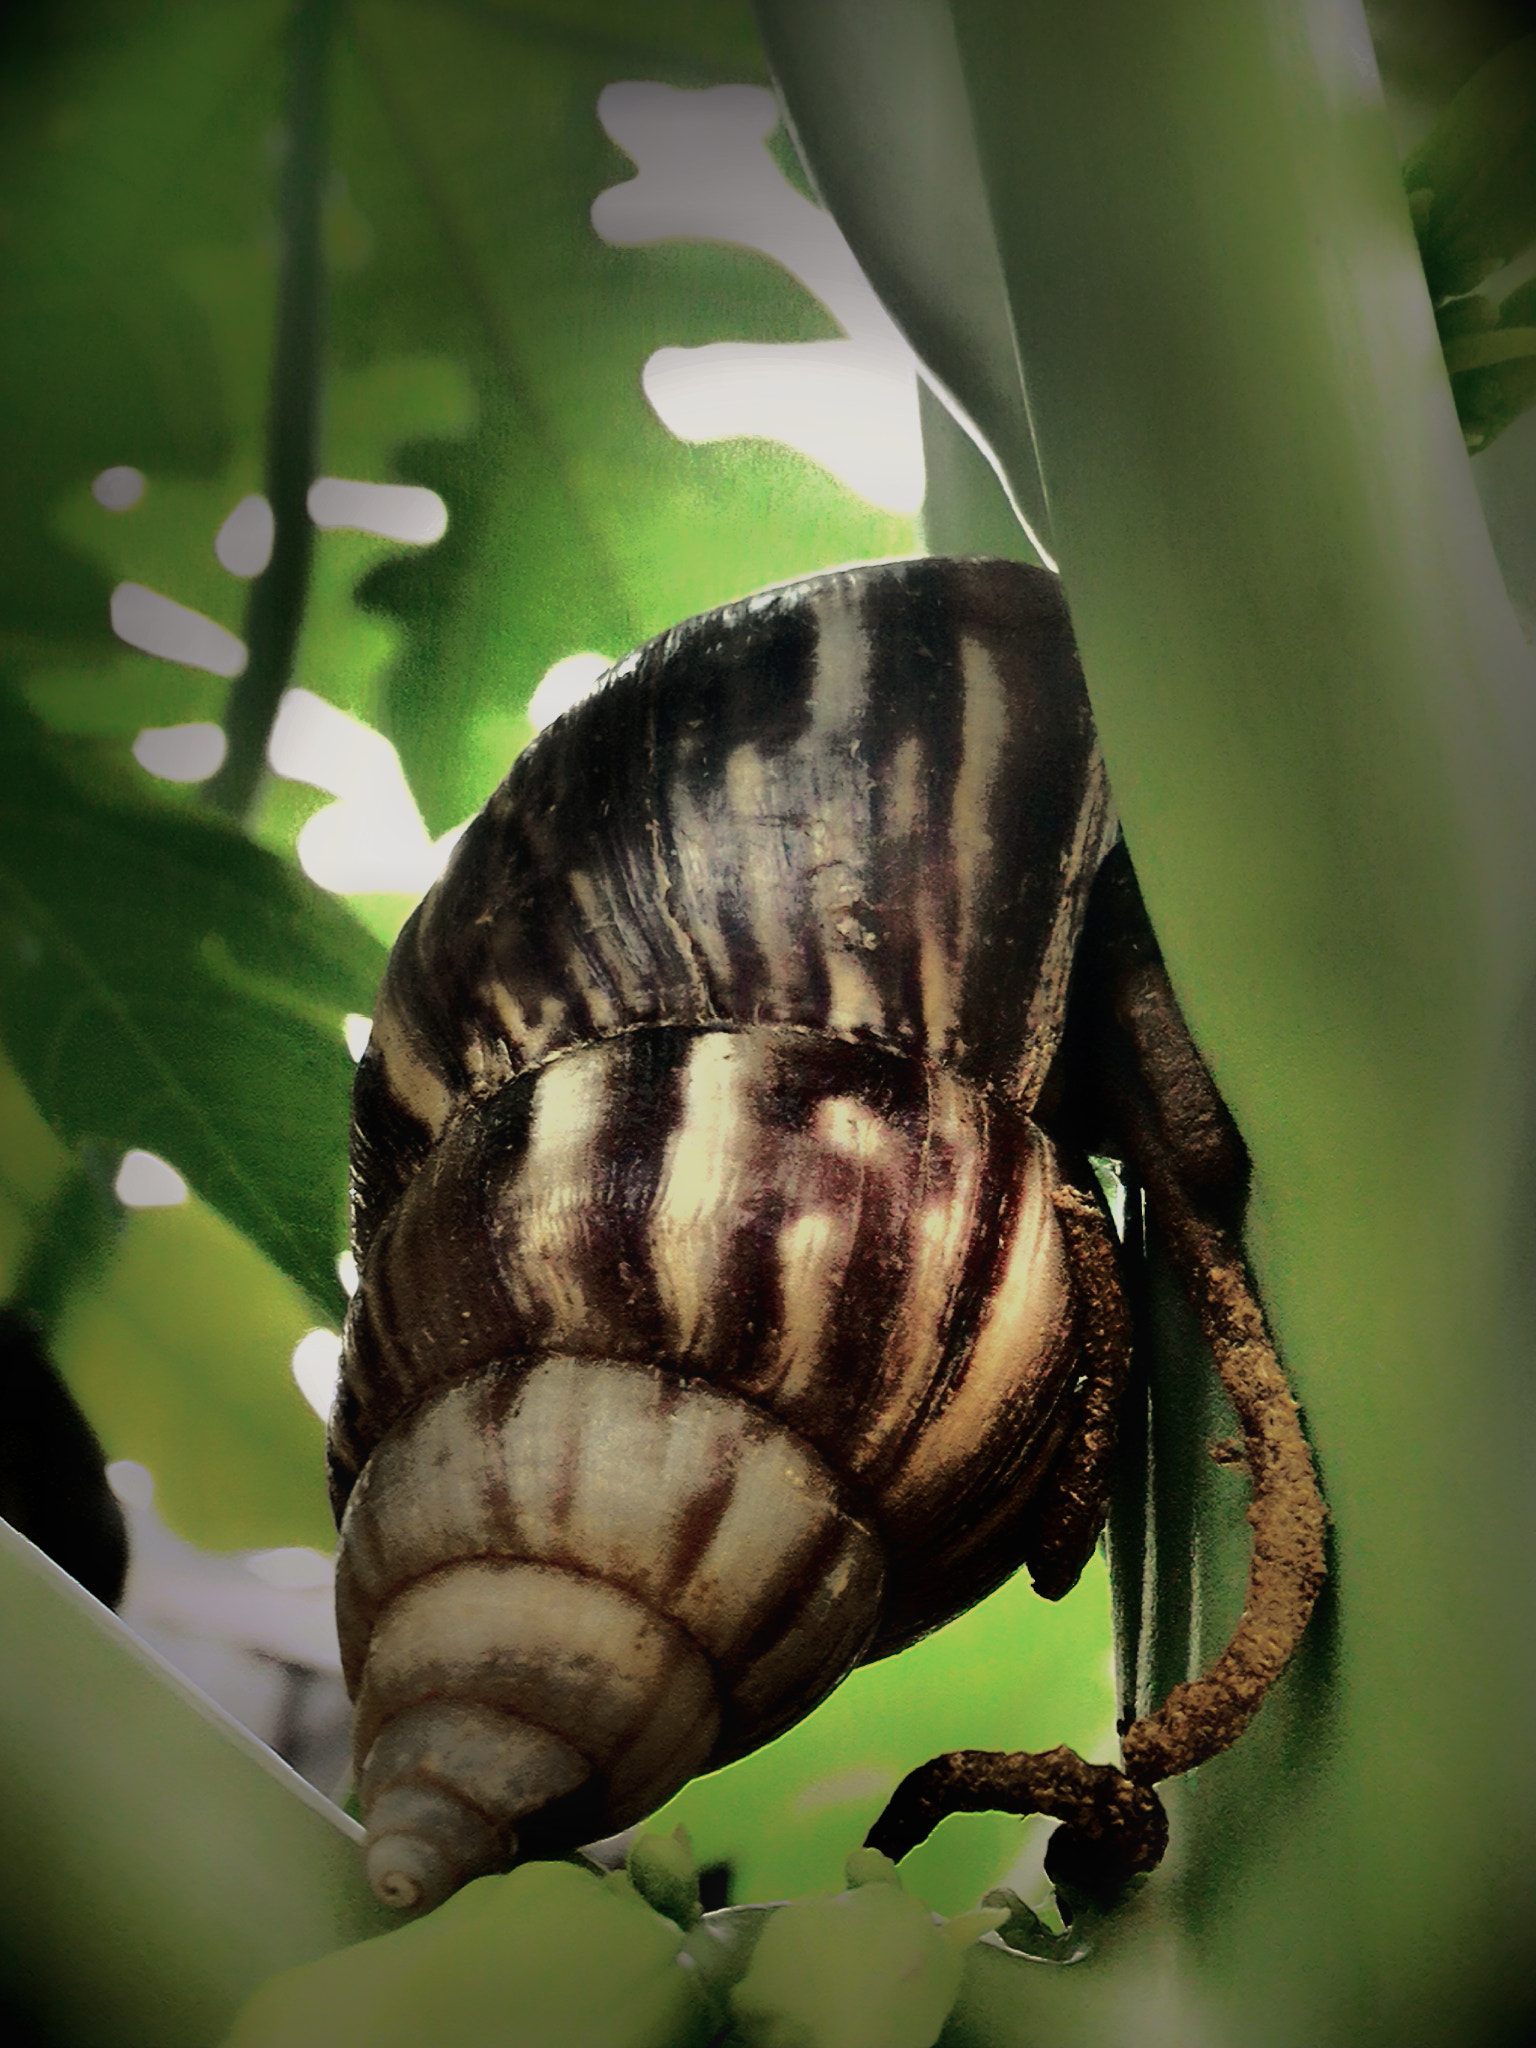 ASUS Z008D sample photo. Even a snail go to the bathroom photography